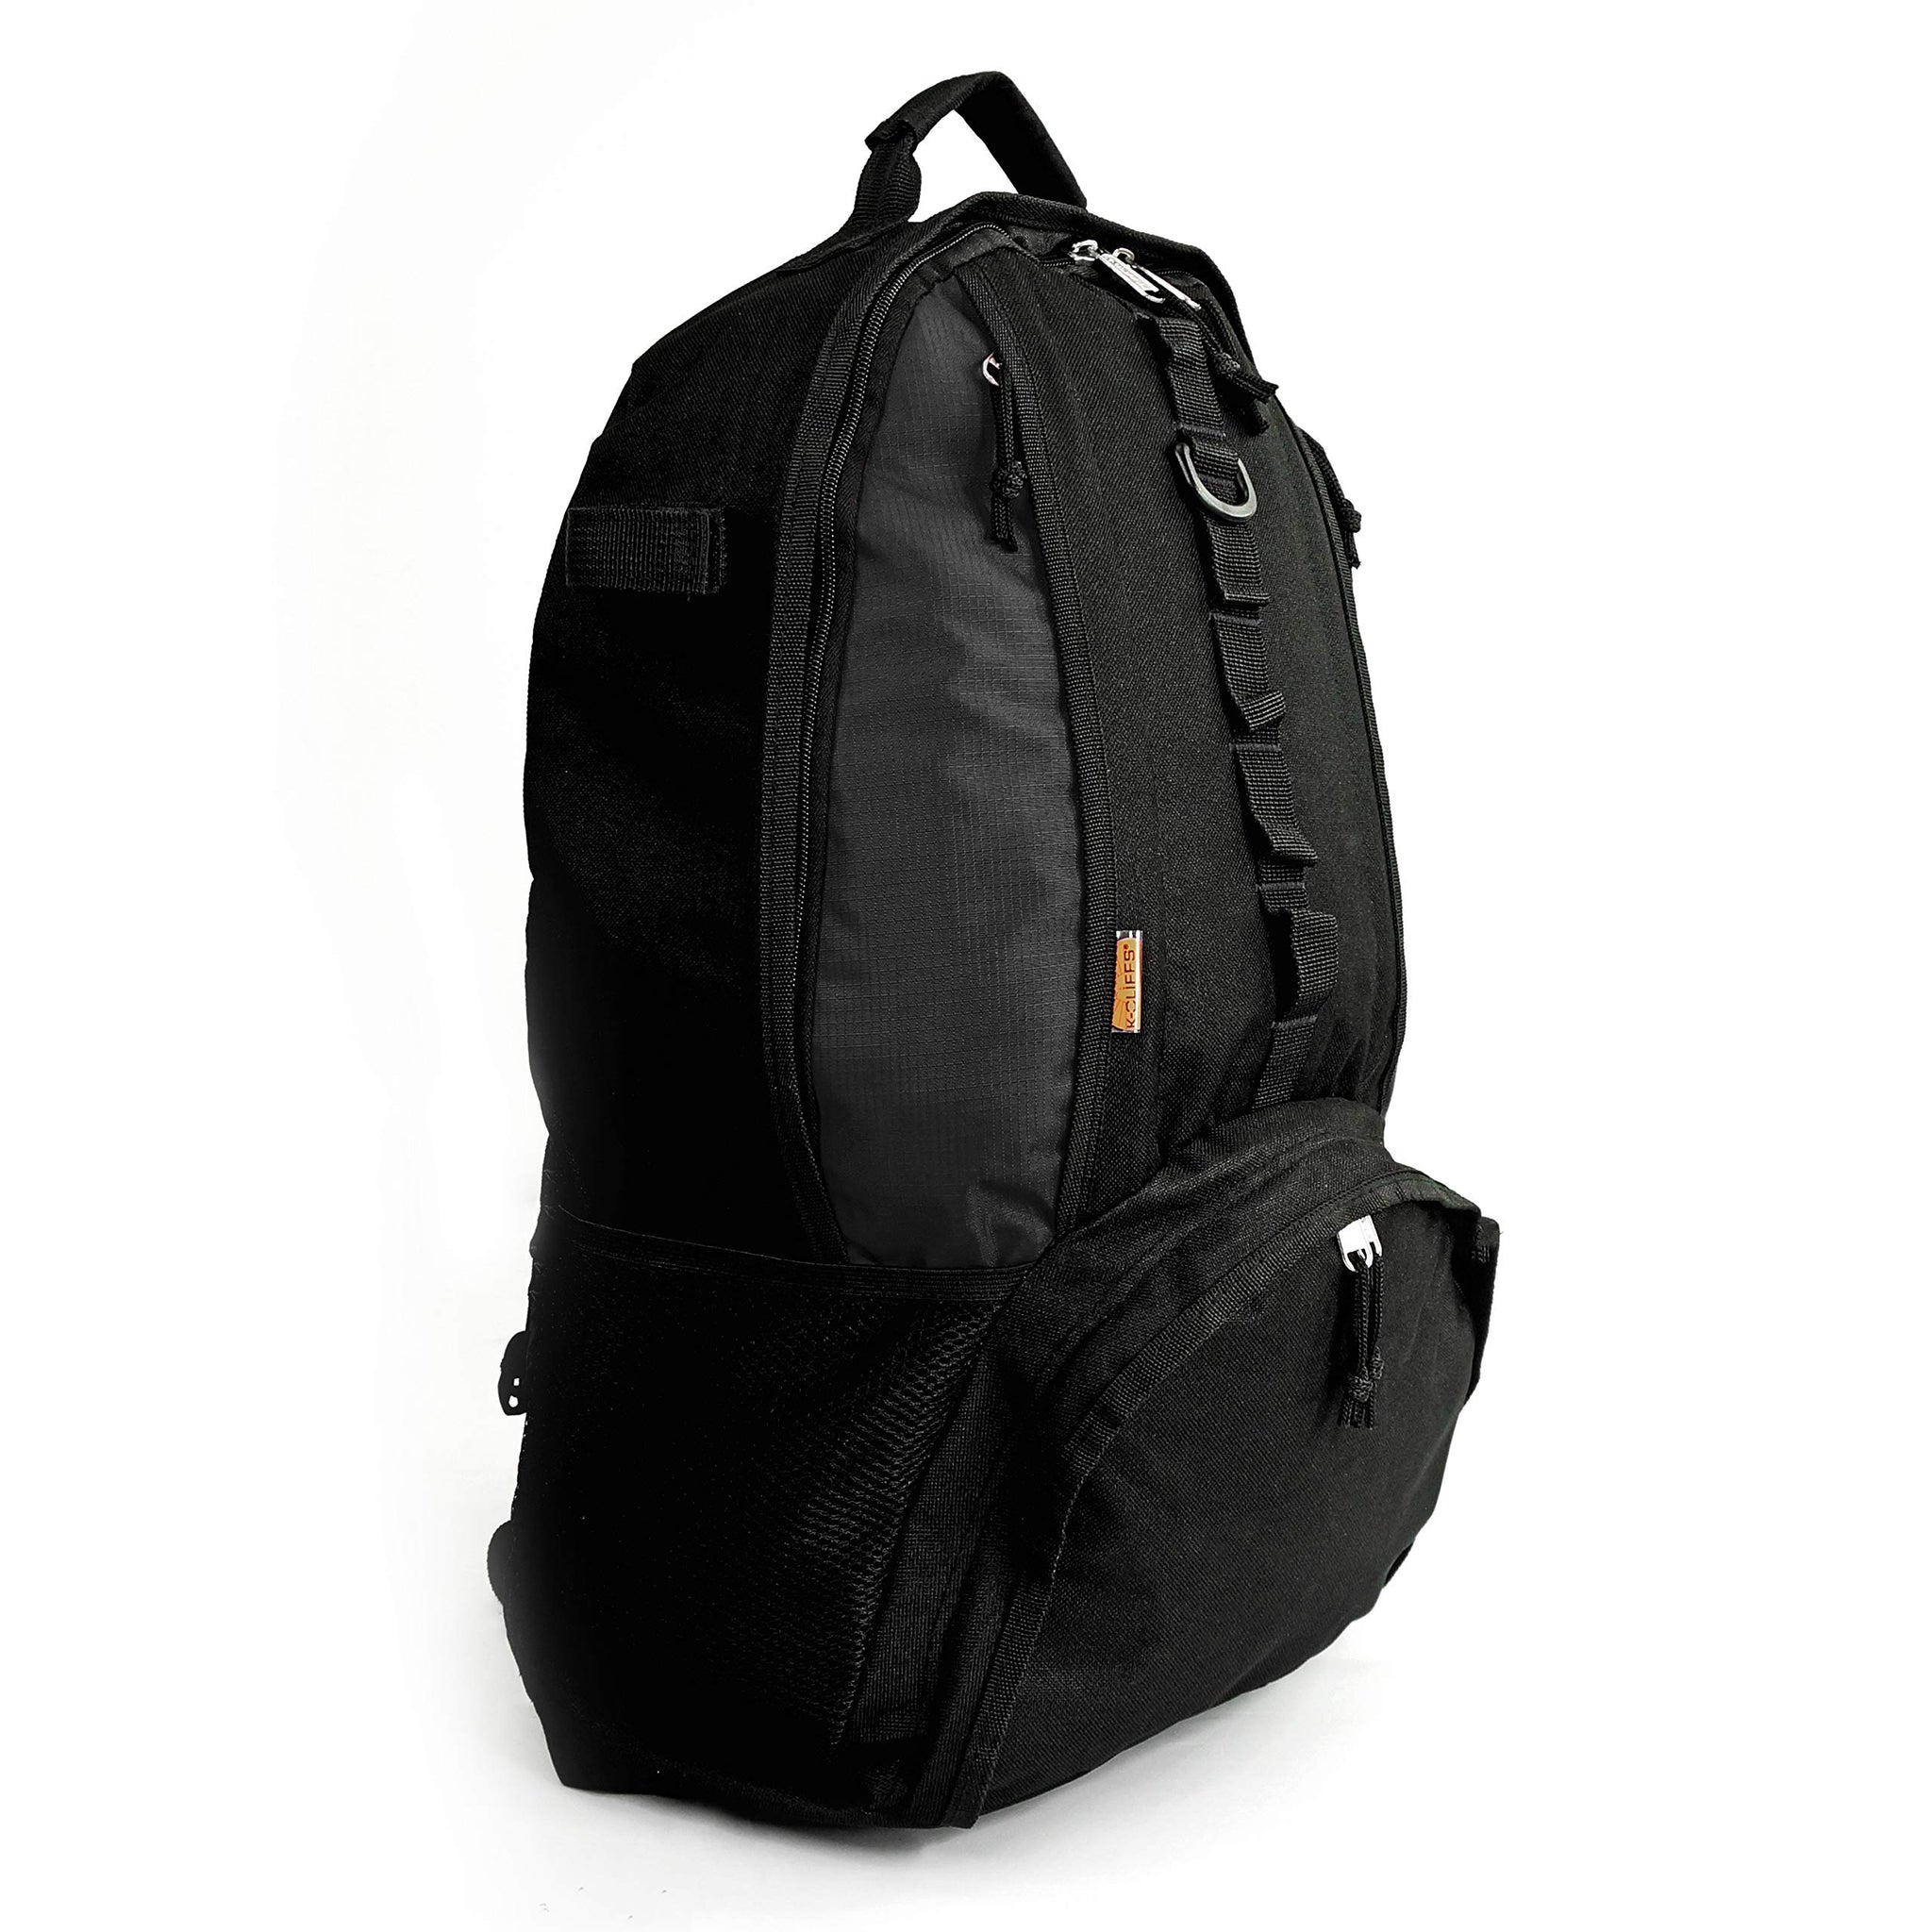 backpack with basketball compartment